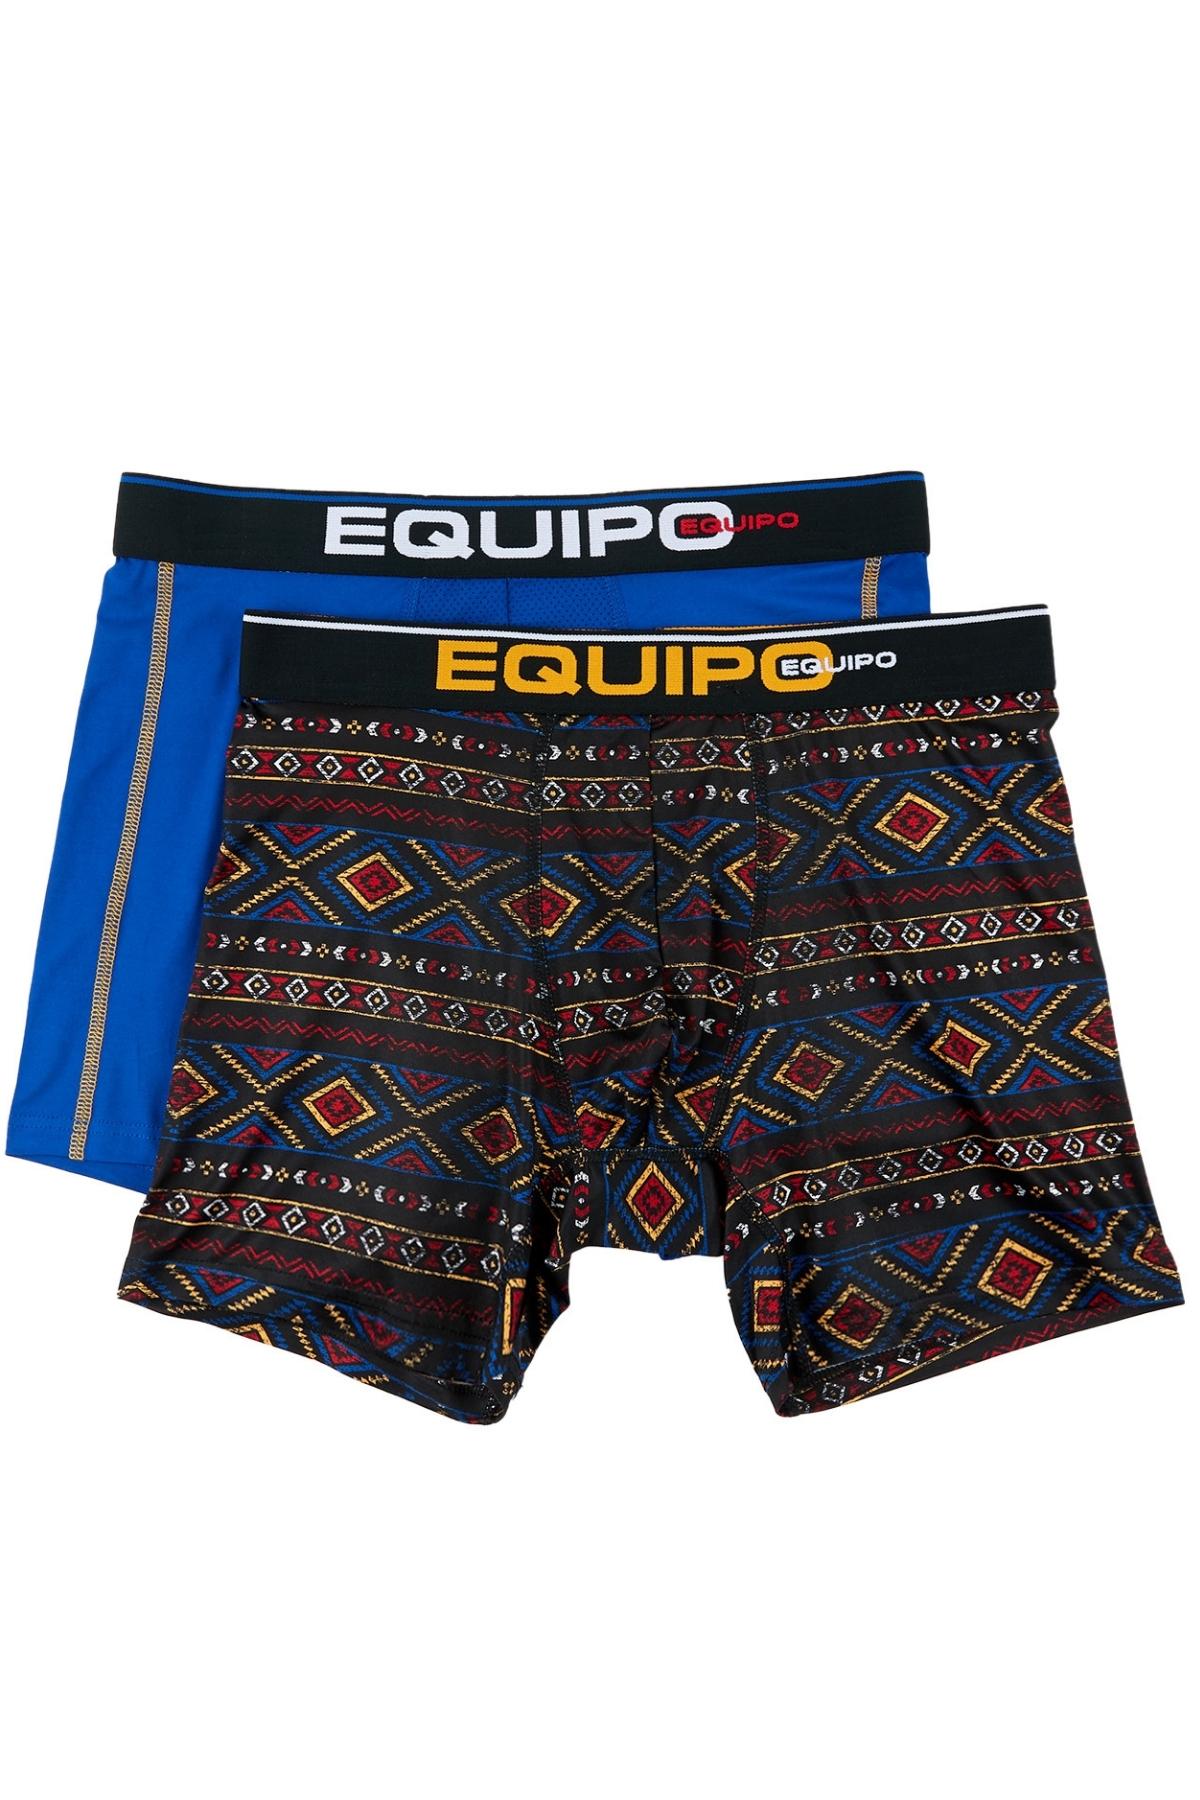 Equipo Blue and Diagonal Lines Quick Dry Performace 2-Pack Boxer